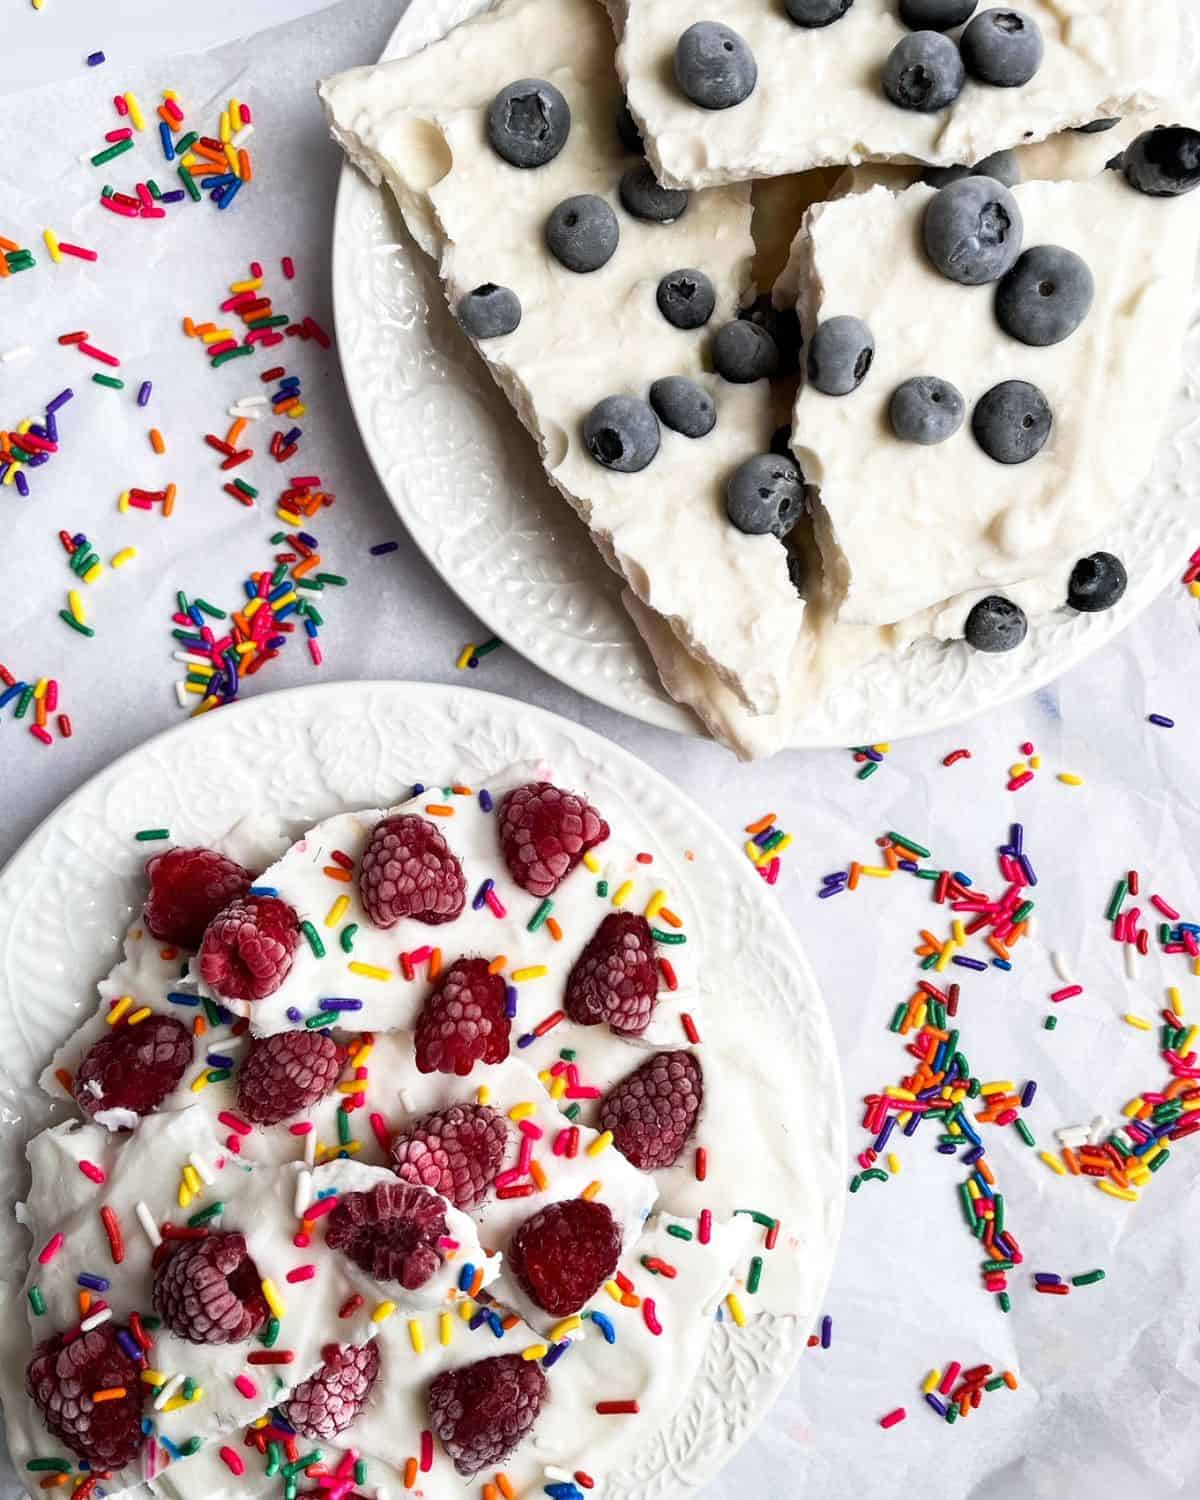 Breakfast bark on white plates with rainbow sprinkles on the table.